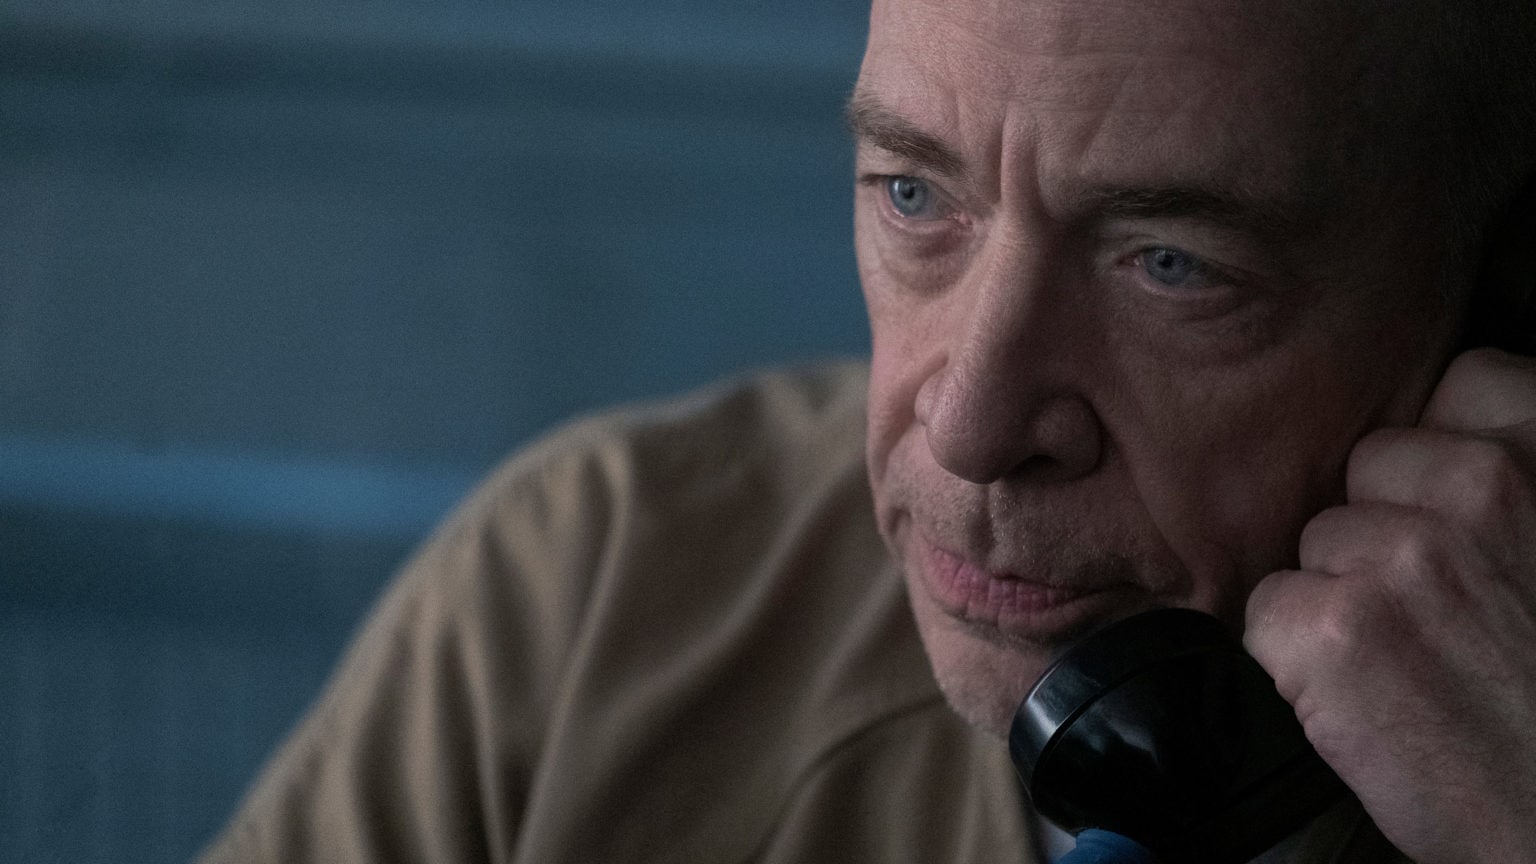 J.K. Simmons takes Defending Jacob to an unsettling new place.